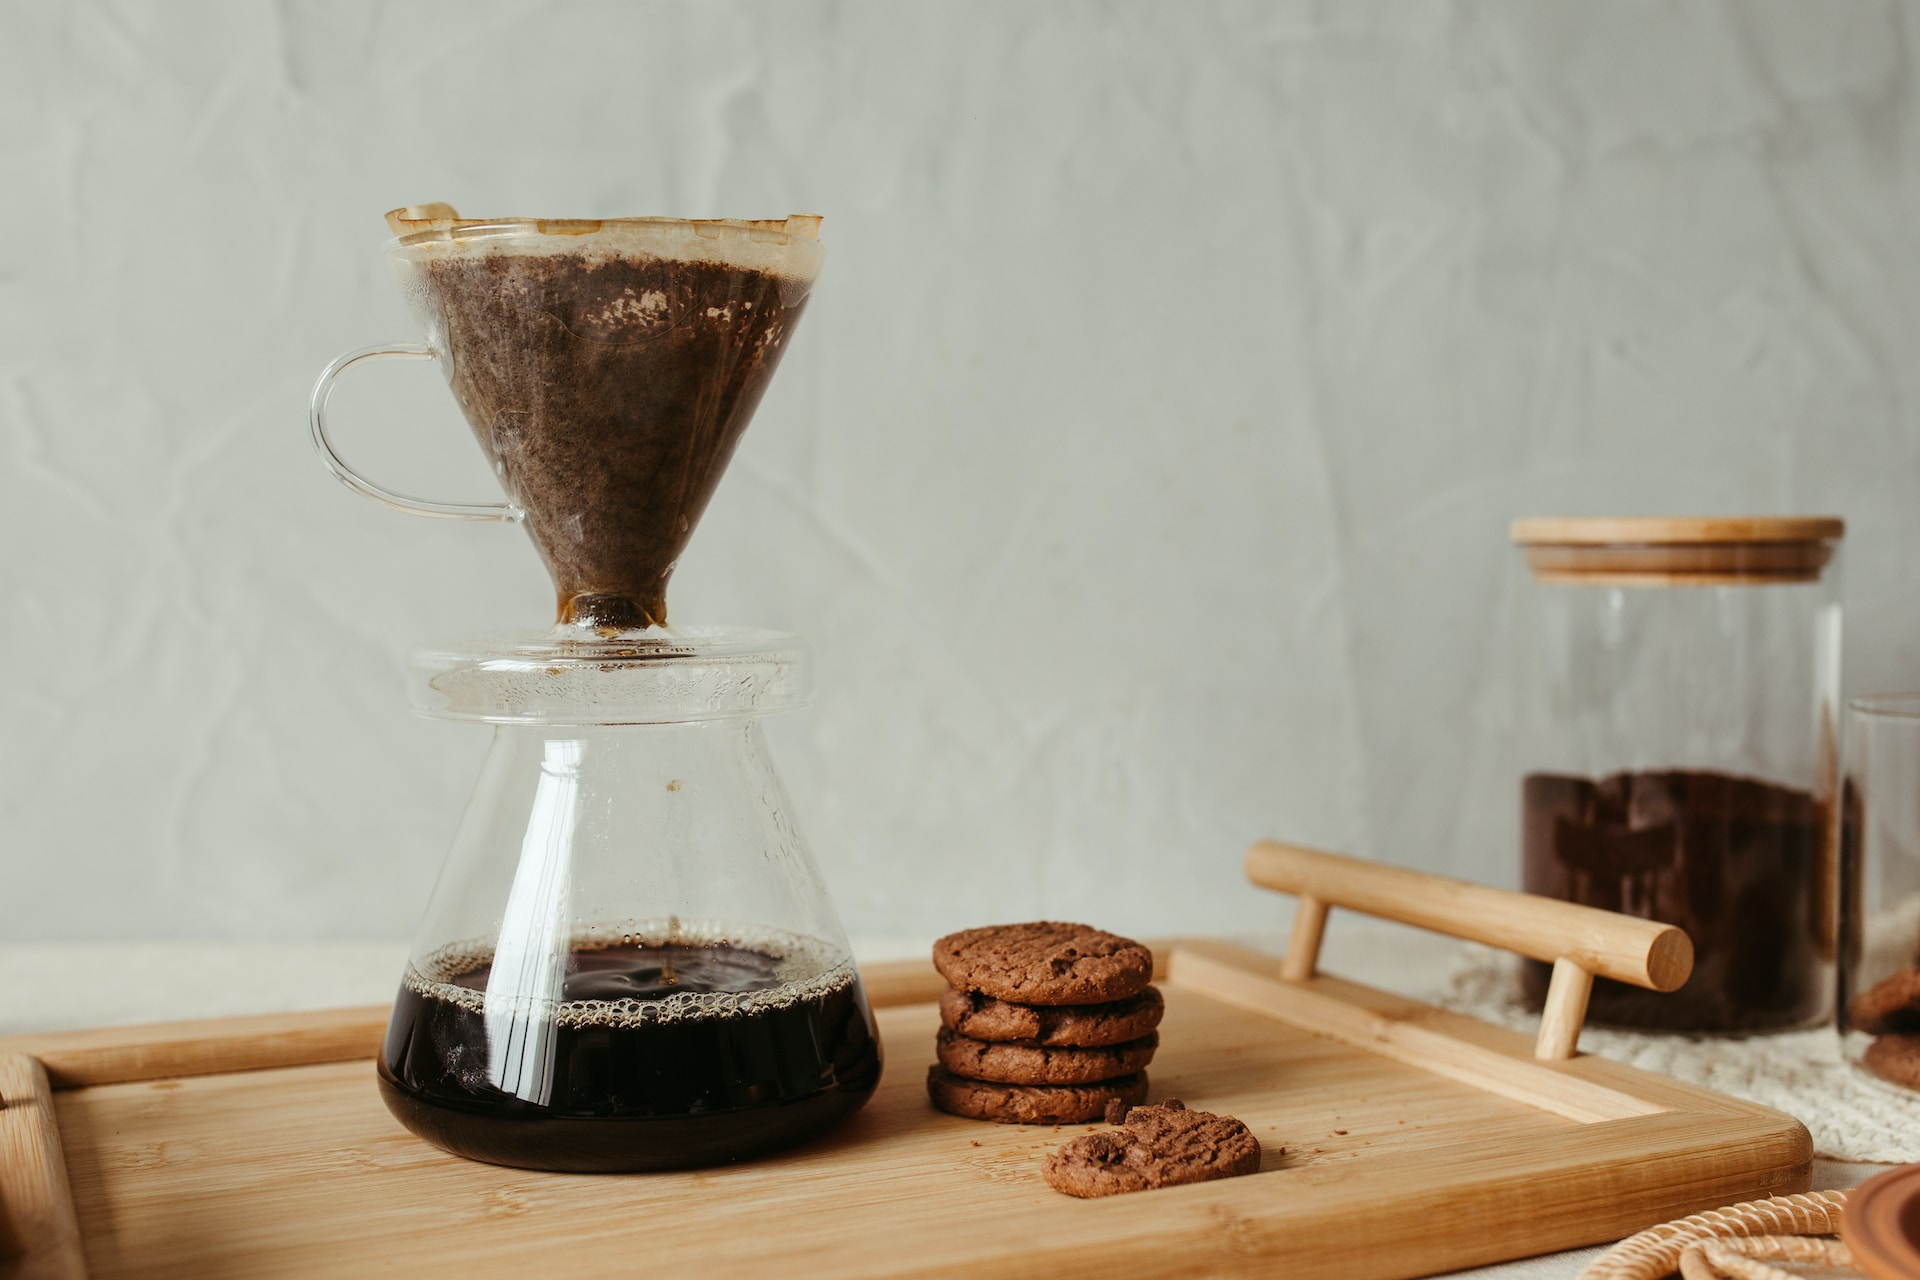 A pour over coffee cones on a wooden tray next to chocolate cookies